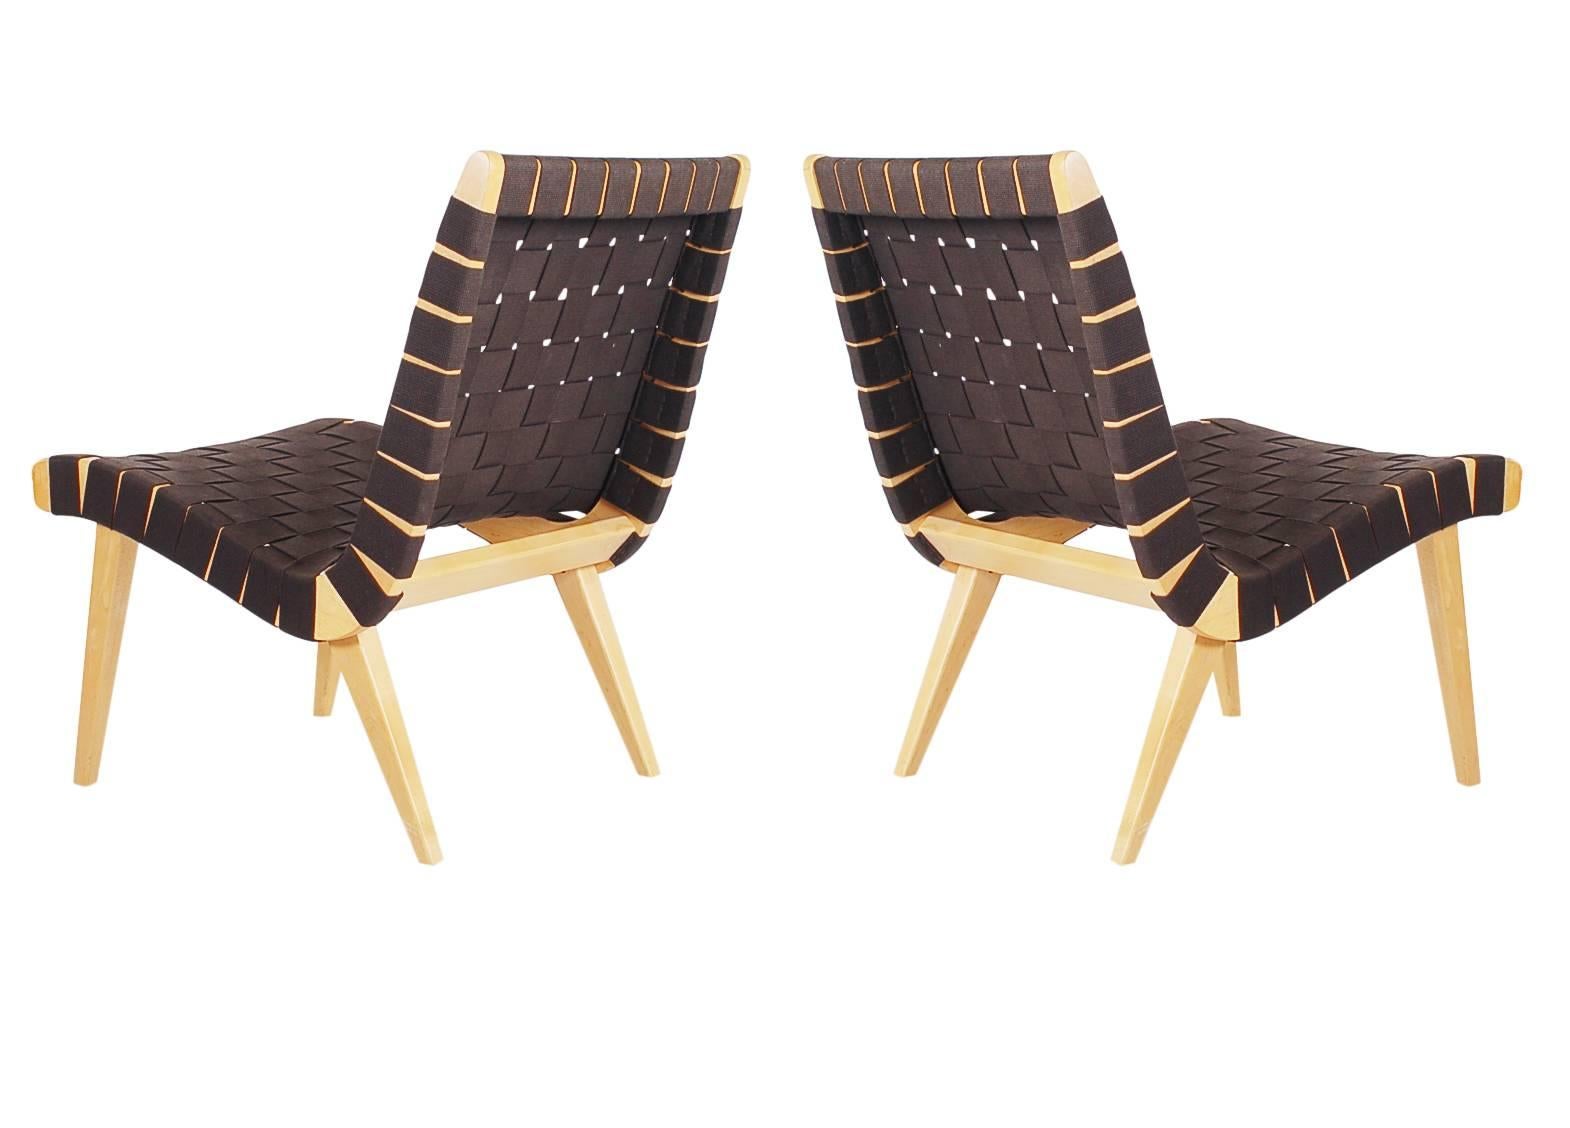 An iconic set of matching lounge chairs designed by Jens Risom and produced by Knoll. They feature solid maple frames with black cotton strapping. Manufacturers labels on both.